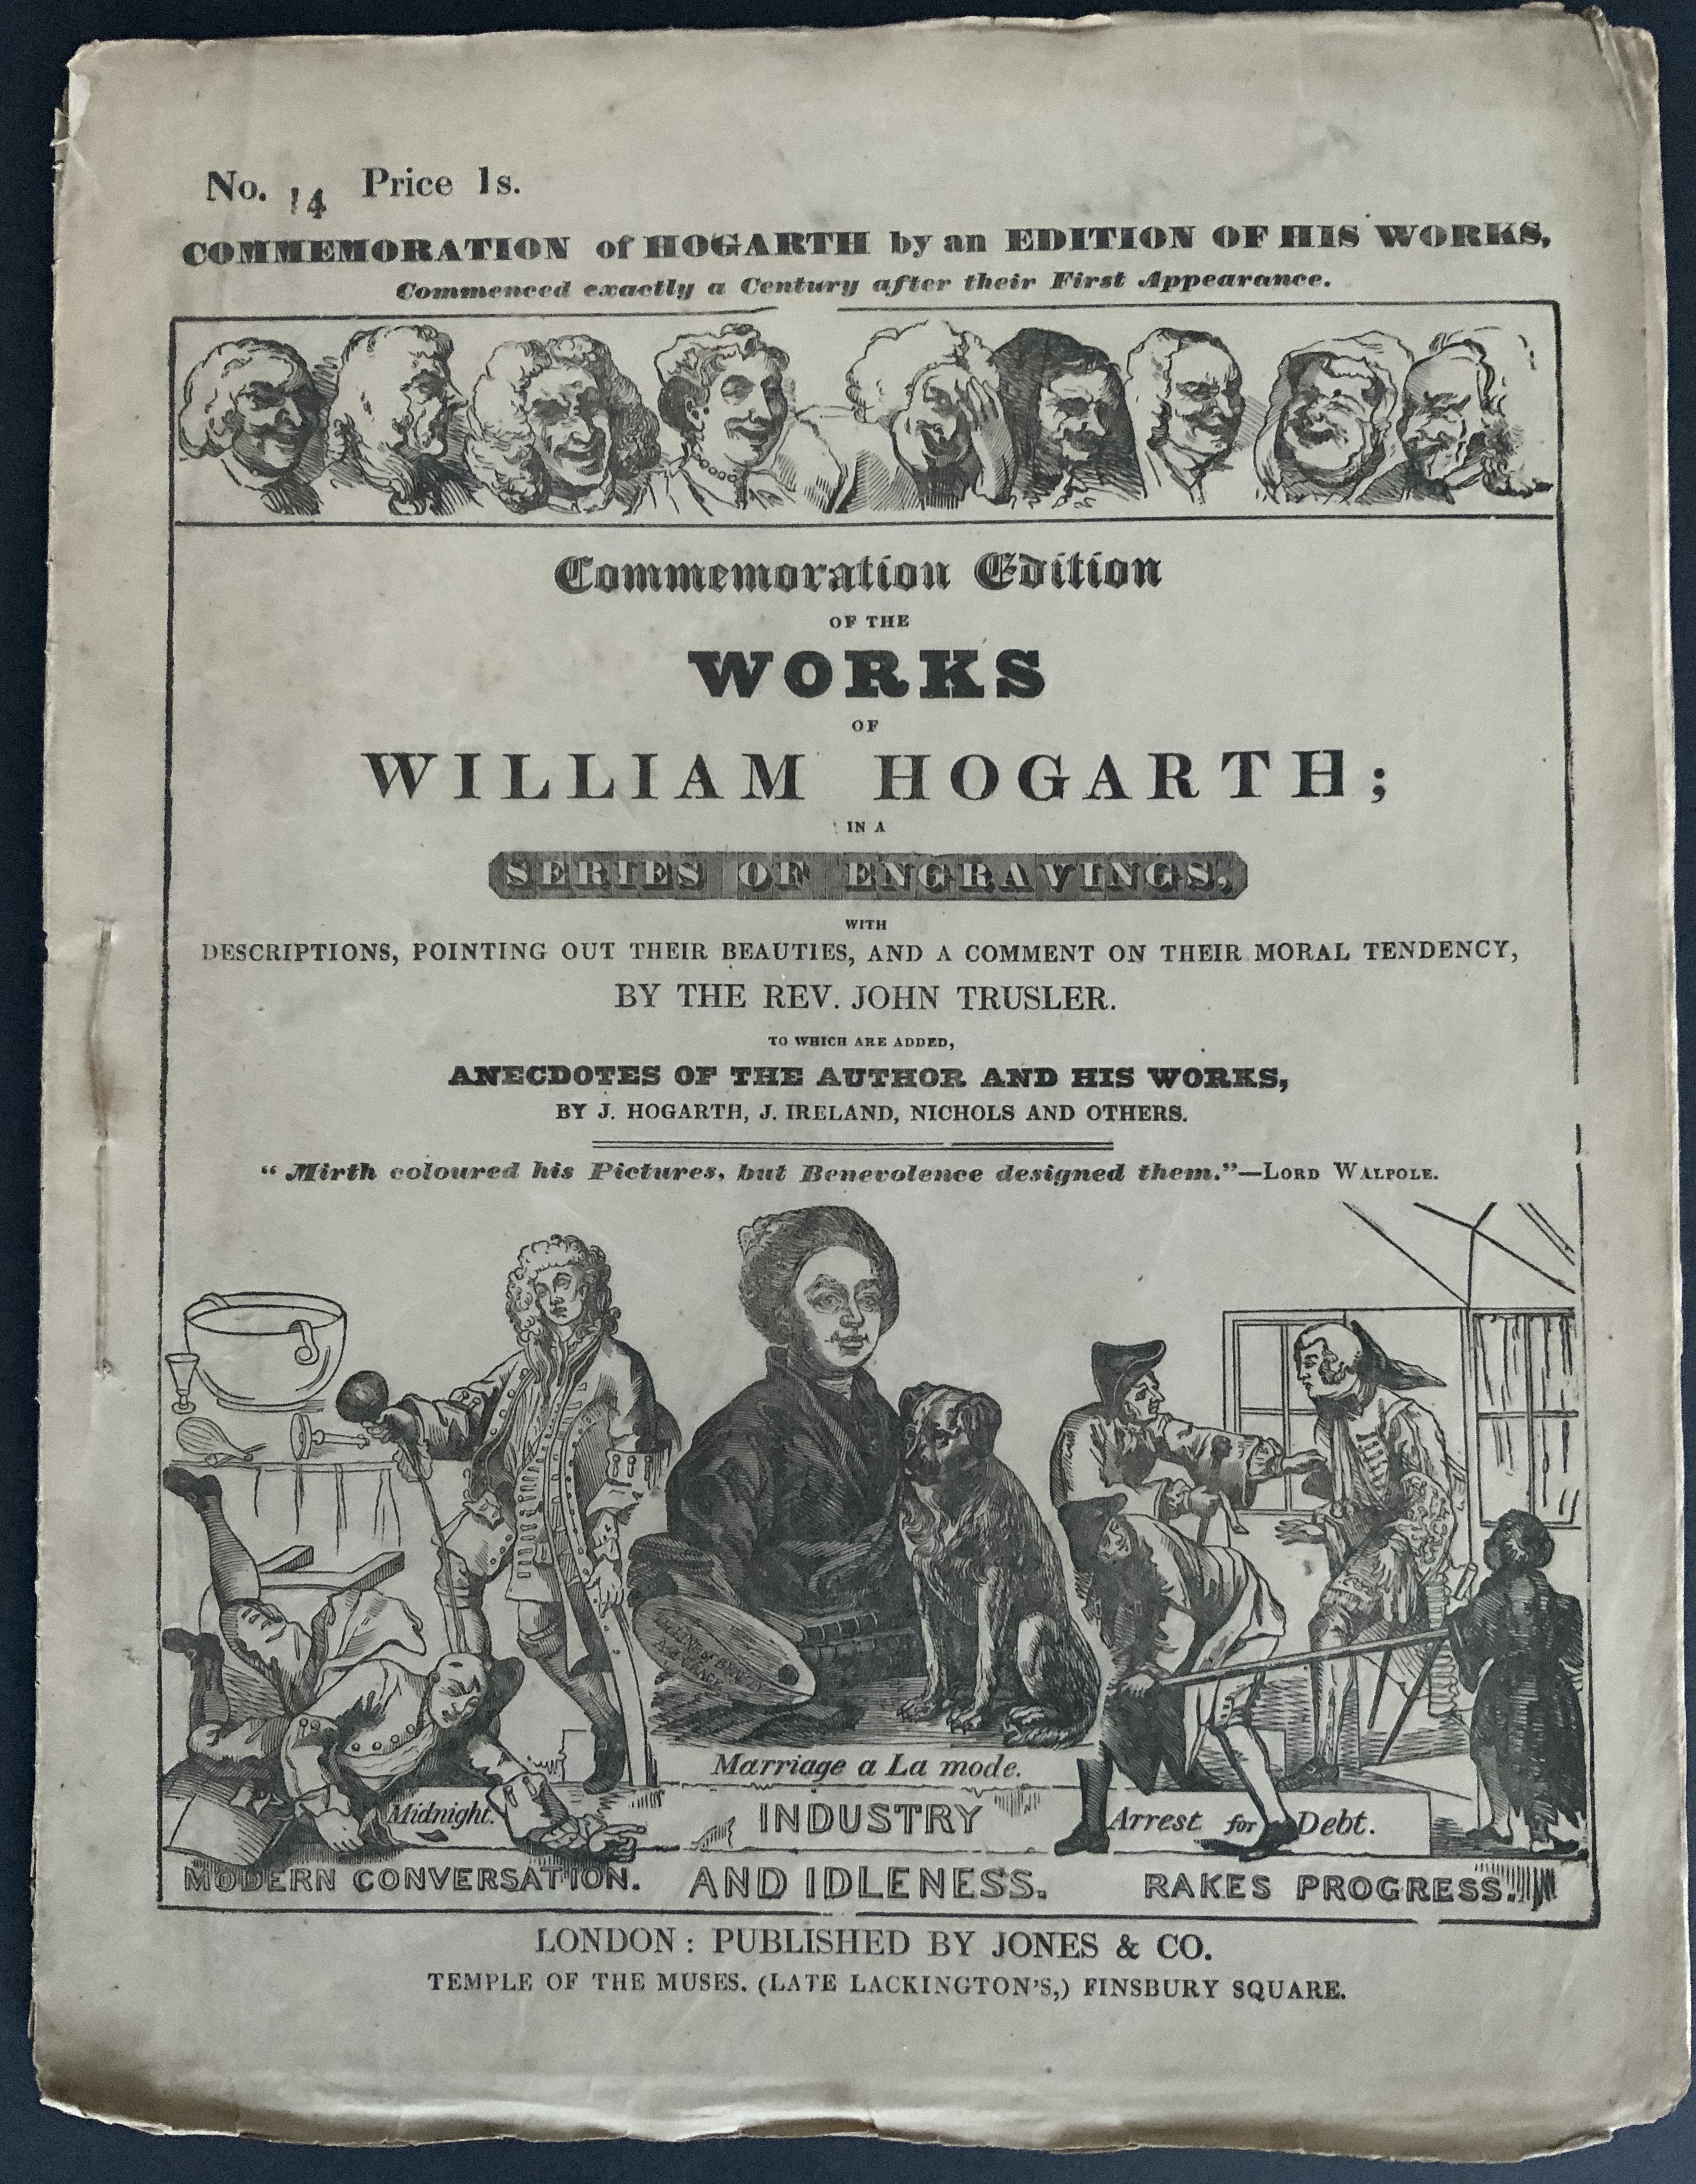 FOUR MAGAZINES OF COMMEMORATION EDITION OF THE WORKS OF WILLIAM HOGARTH IN THE SERIES OF ENGRAVINGS